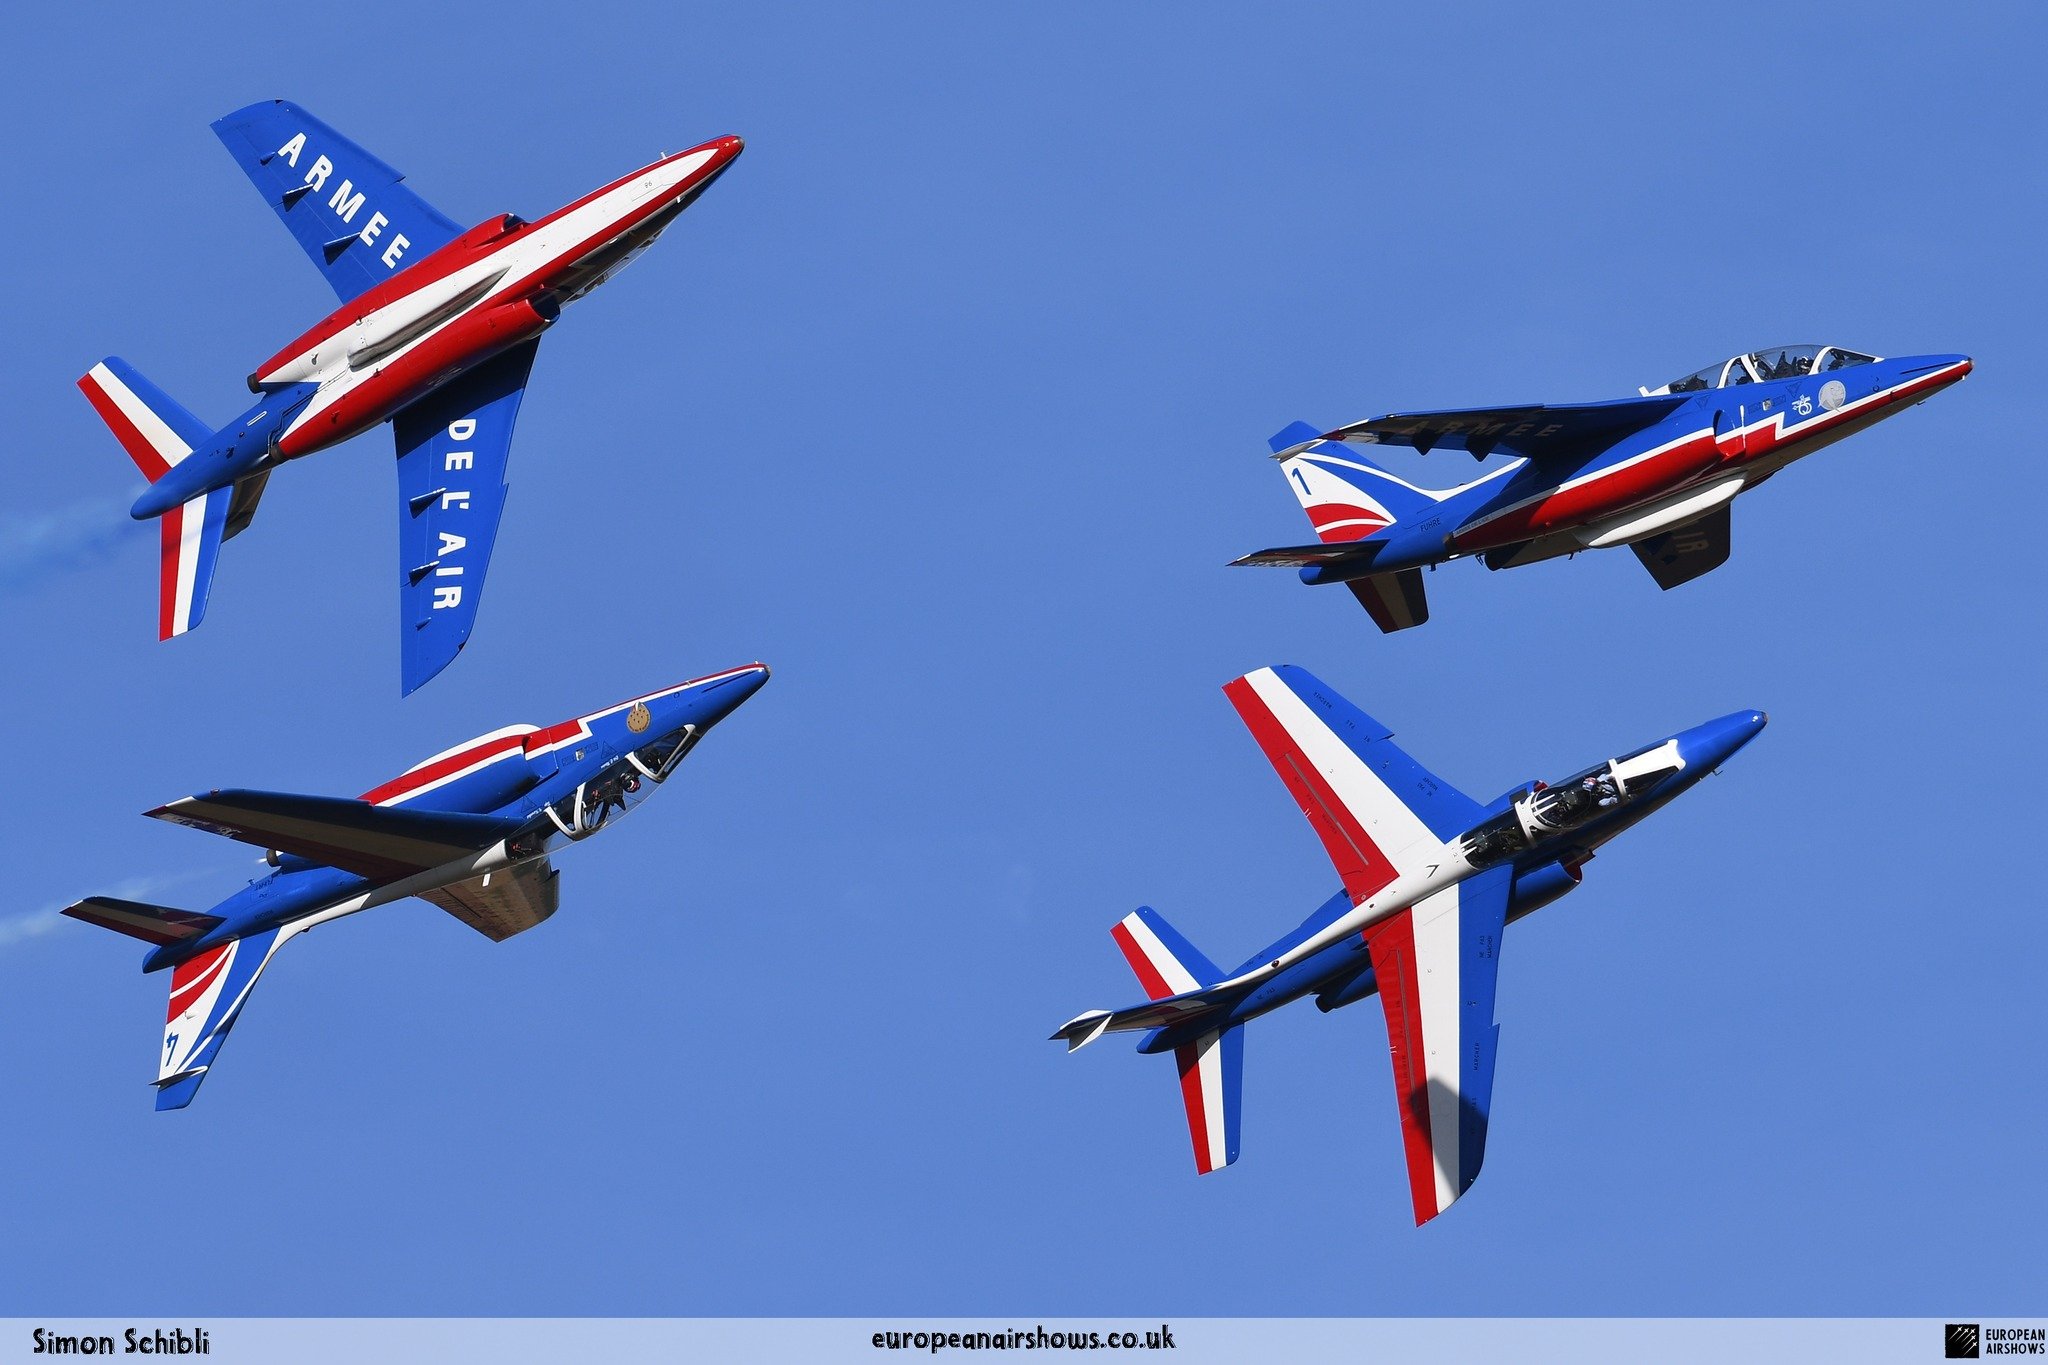 𝐀𝐈𝐑𝐒𝐇𝐎𝐖 𝐍𝐄𝐖𝐒: The French Air &amp; Space Force has published the much-awaited list of 2024 display dates for all their display teams.

Read more on our website by clicking the link below.

https://www.europeanairshows.co.uk/news/french-air